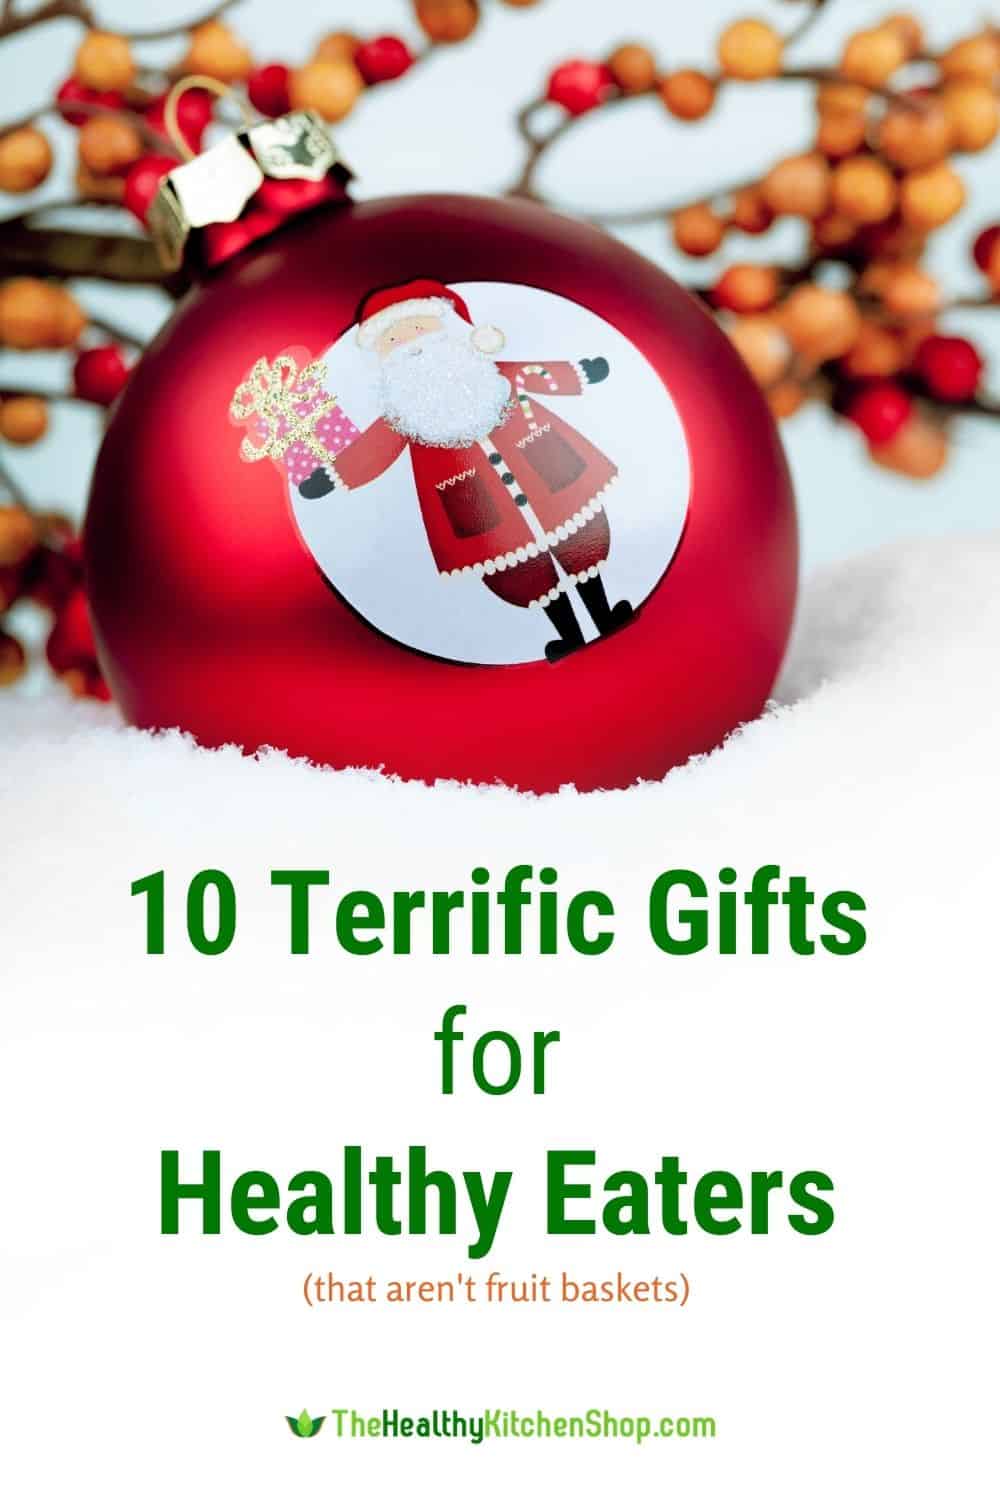 10 Terrific Gifts for Healthy Eaters